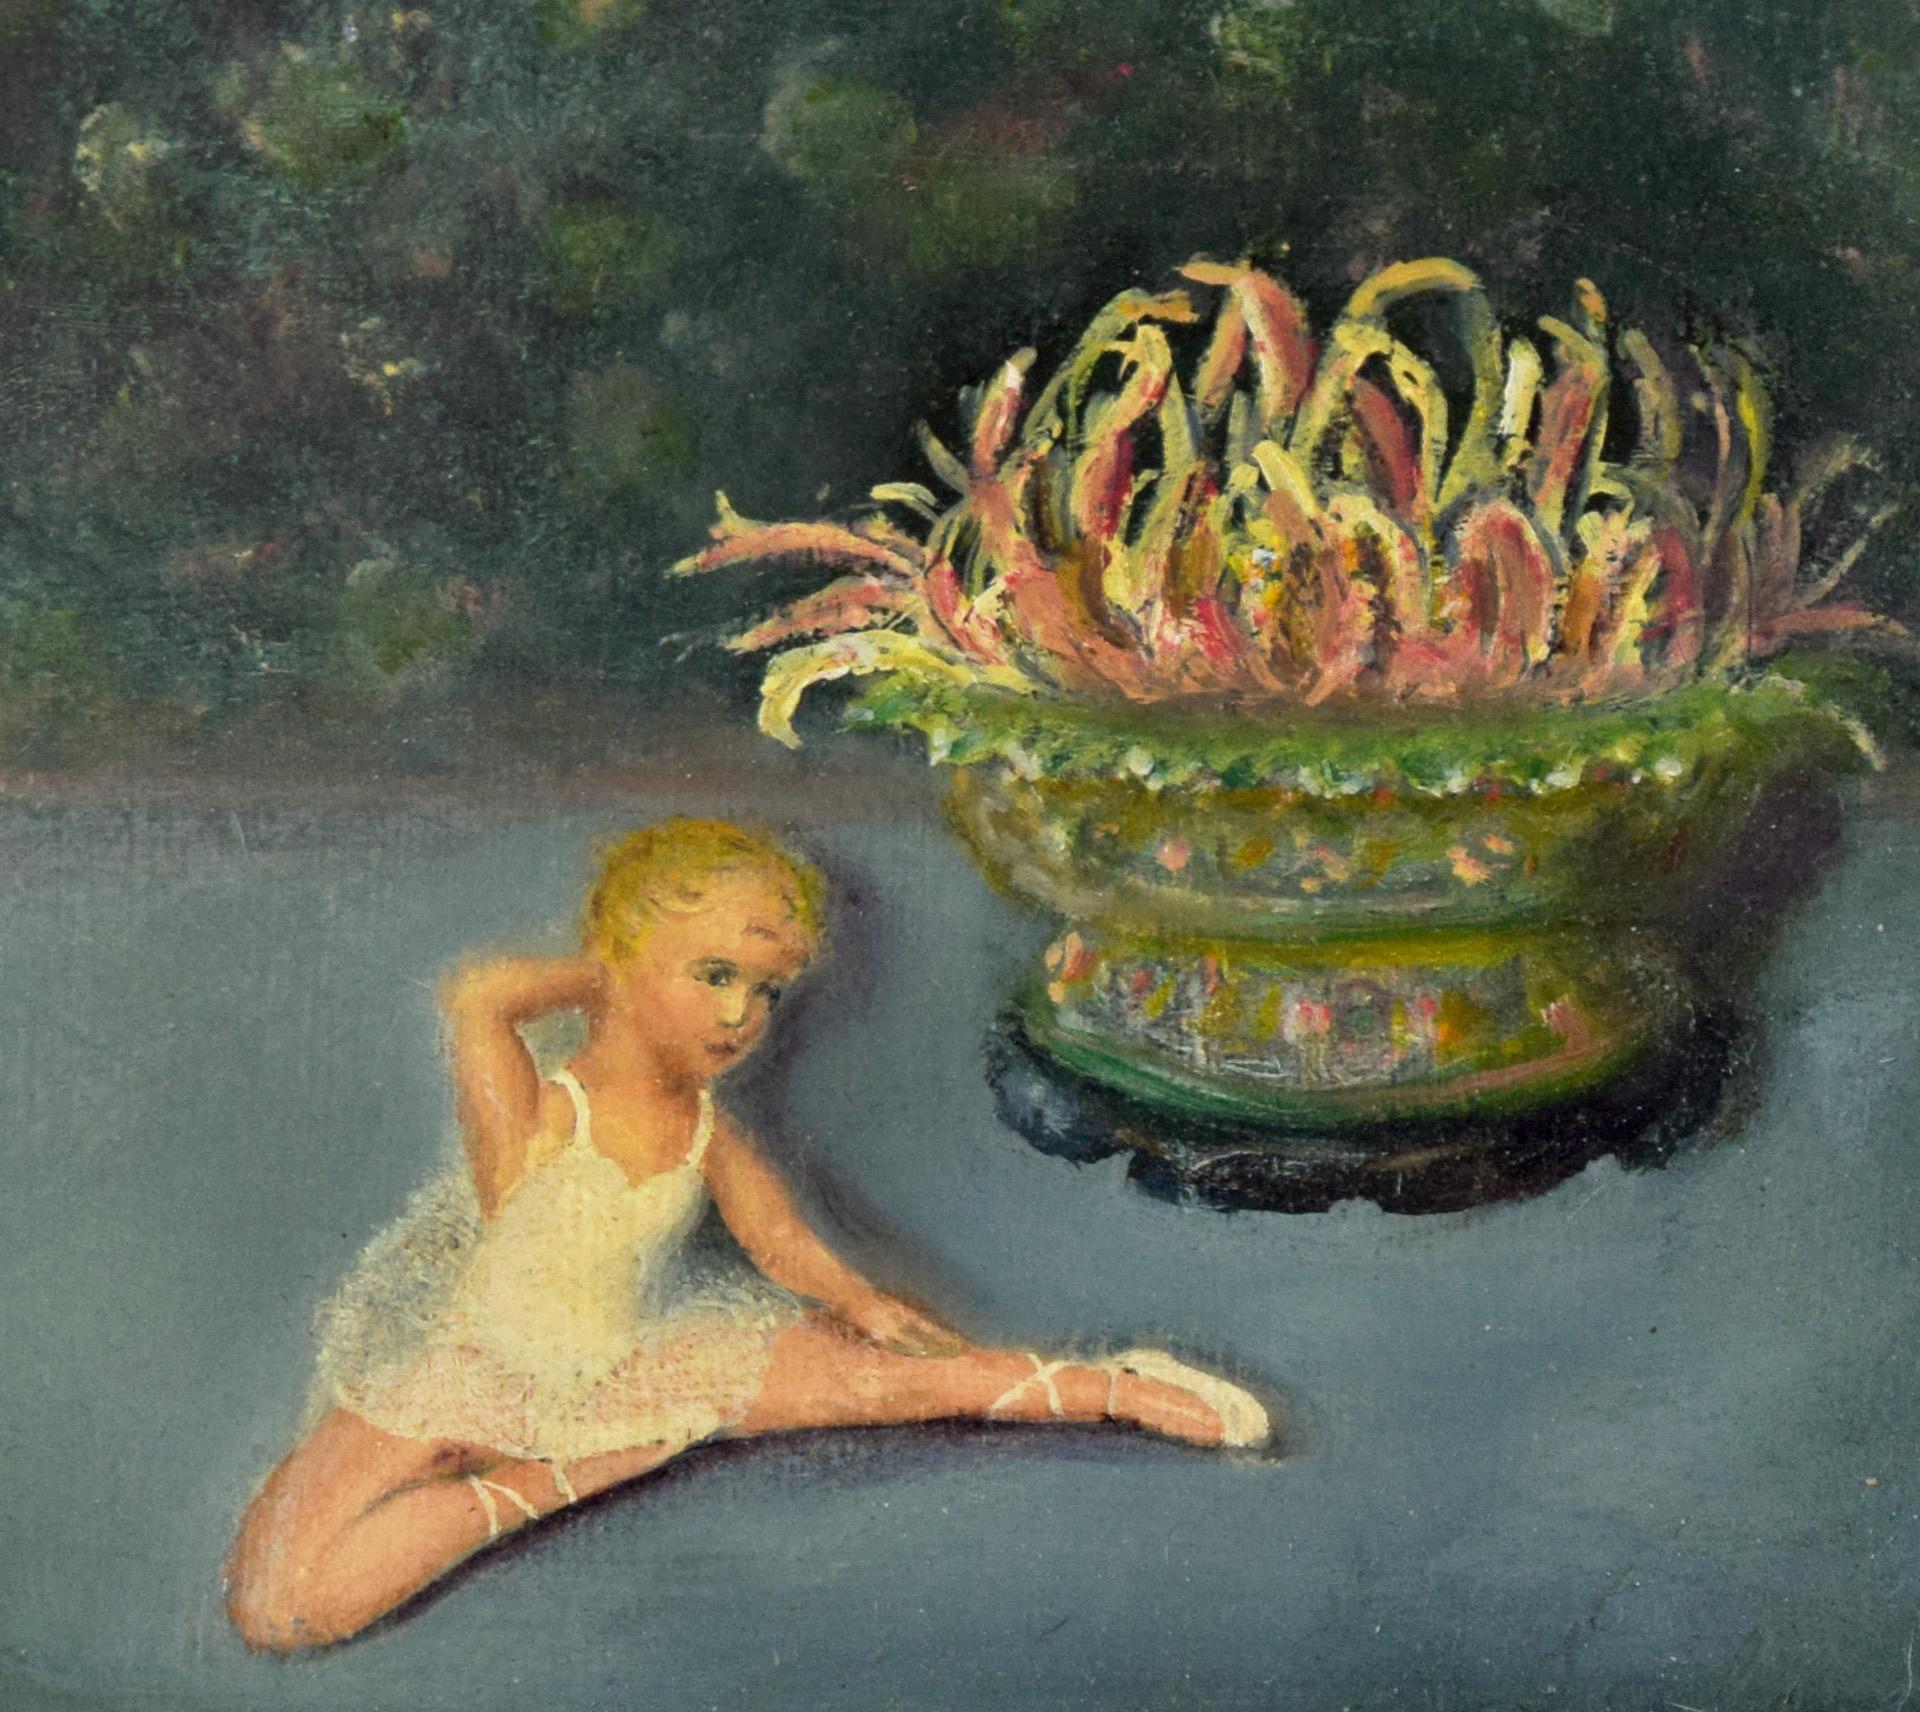 Gorgeous oil painting depicting a young blonde ballerina in pose next to a colorful vase with hues of green and pink in the background.
Presented in a giltwood frame. Image, 6.5